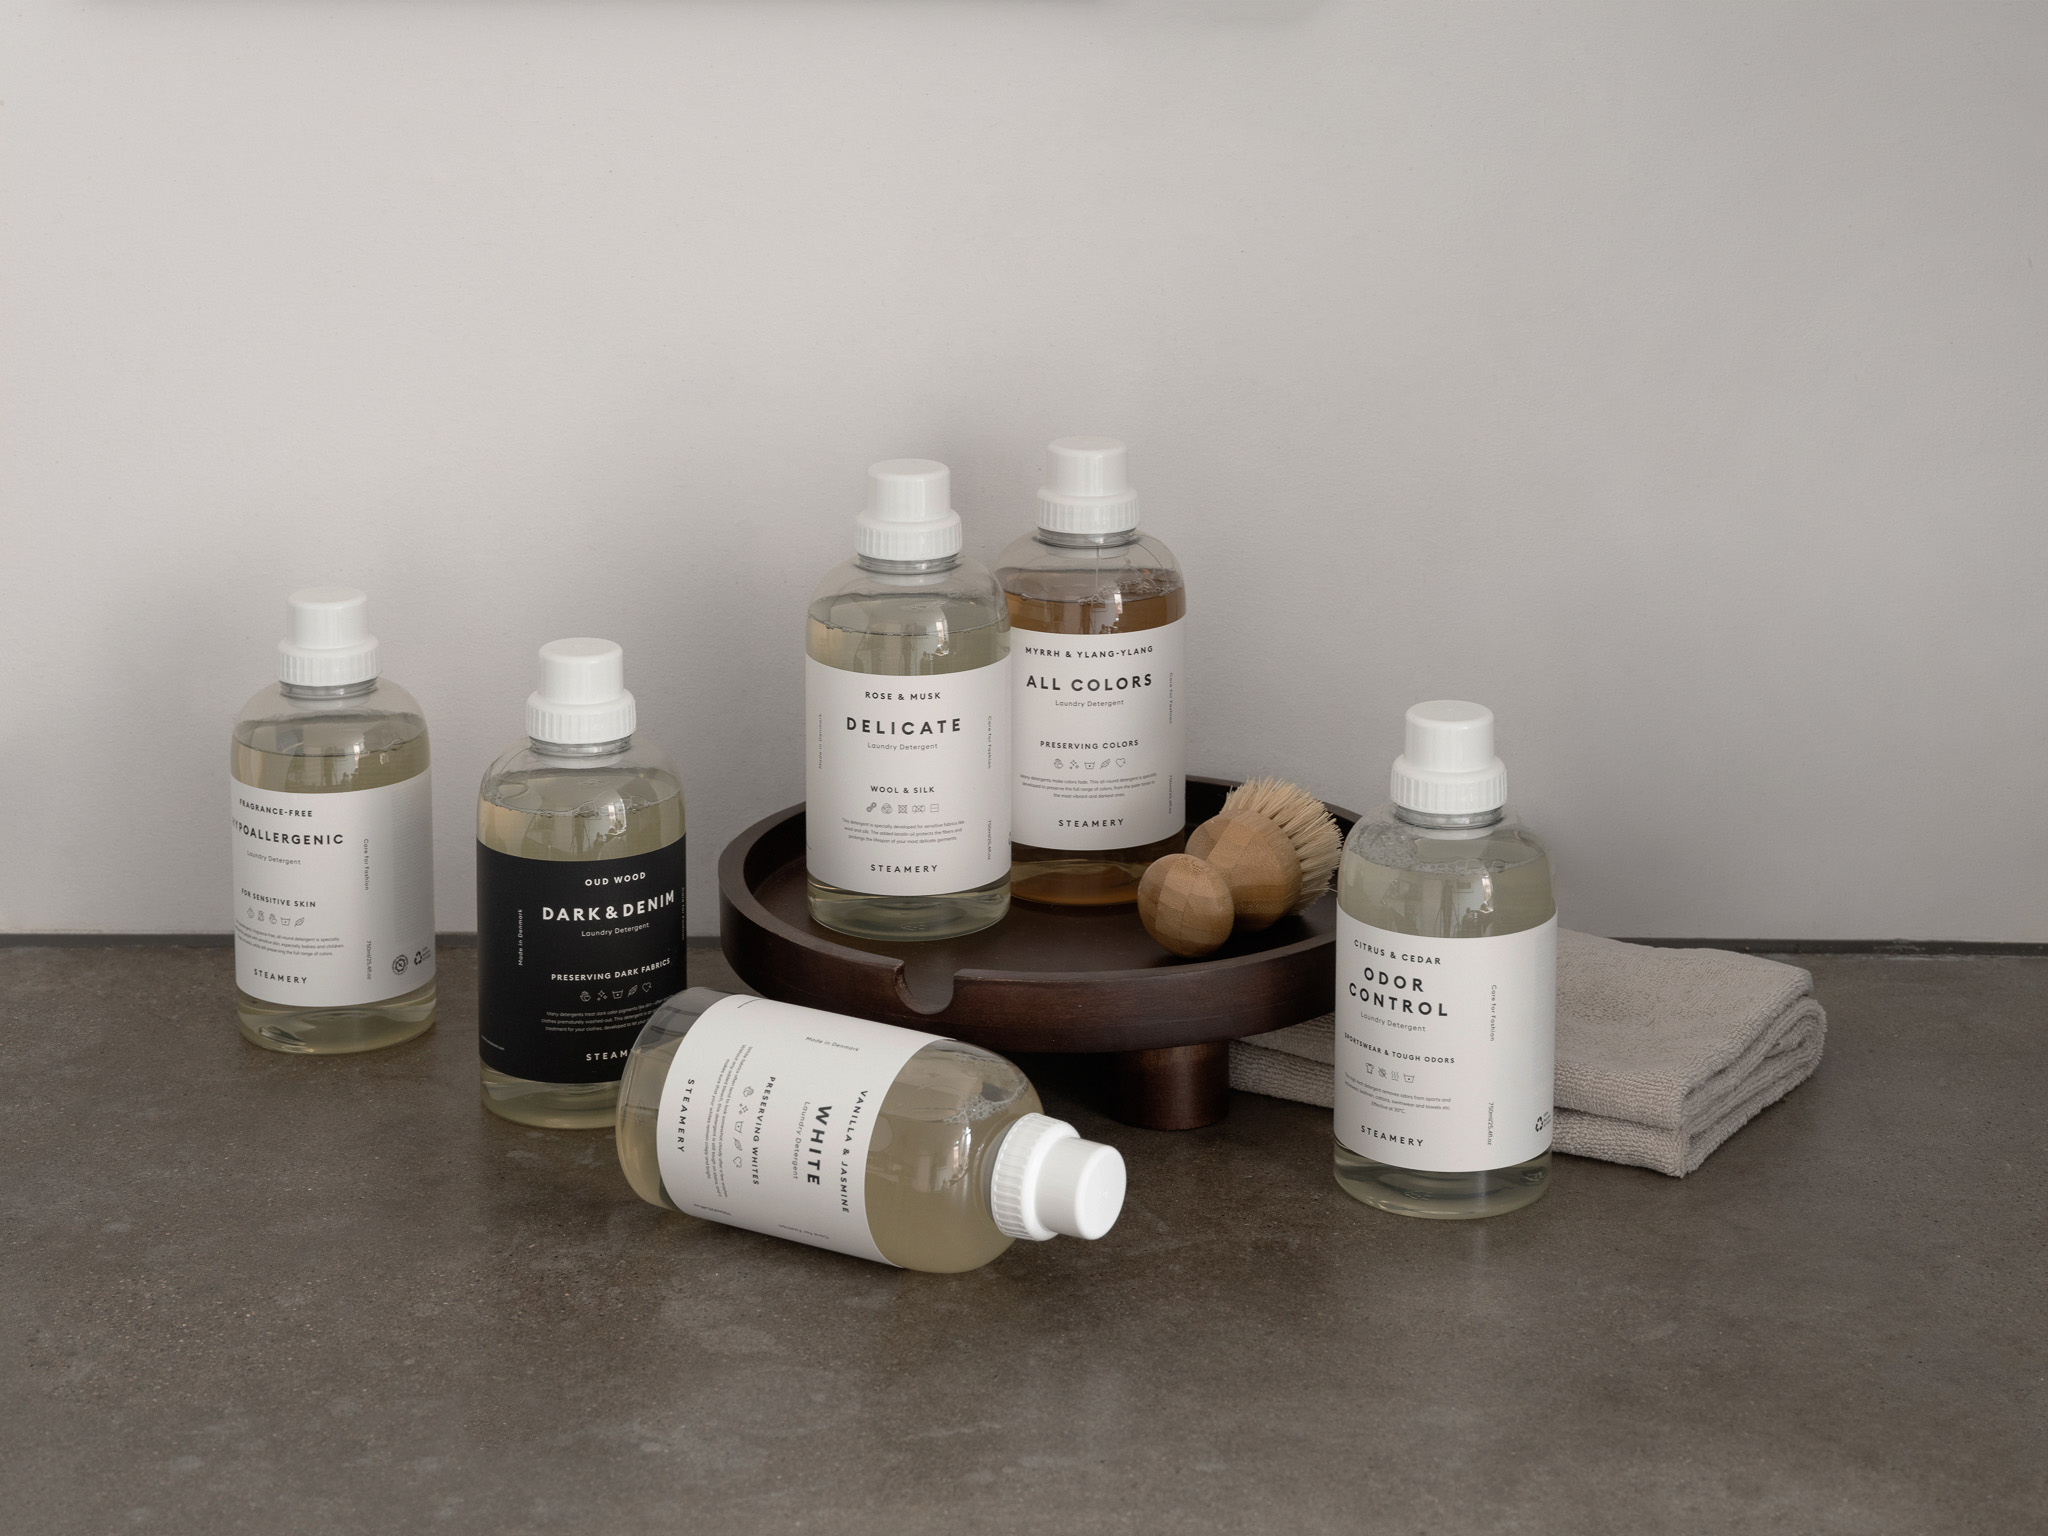 STEAMERY // DELICATE - LAUNDRY DETERGENT